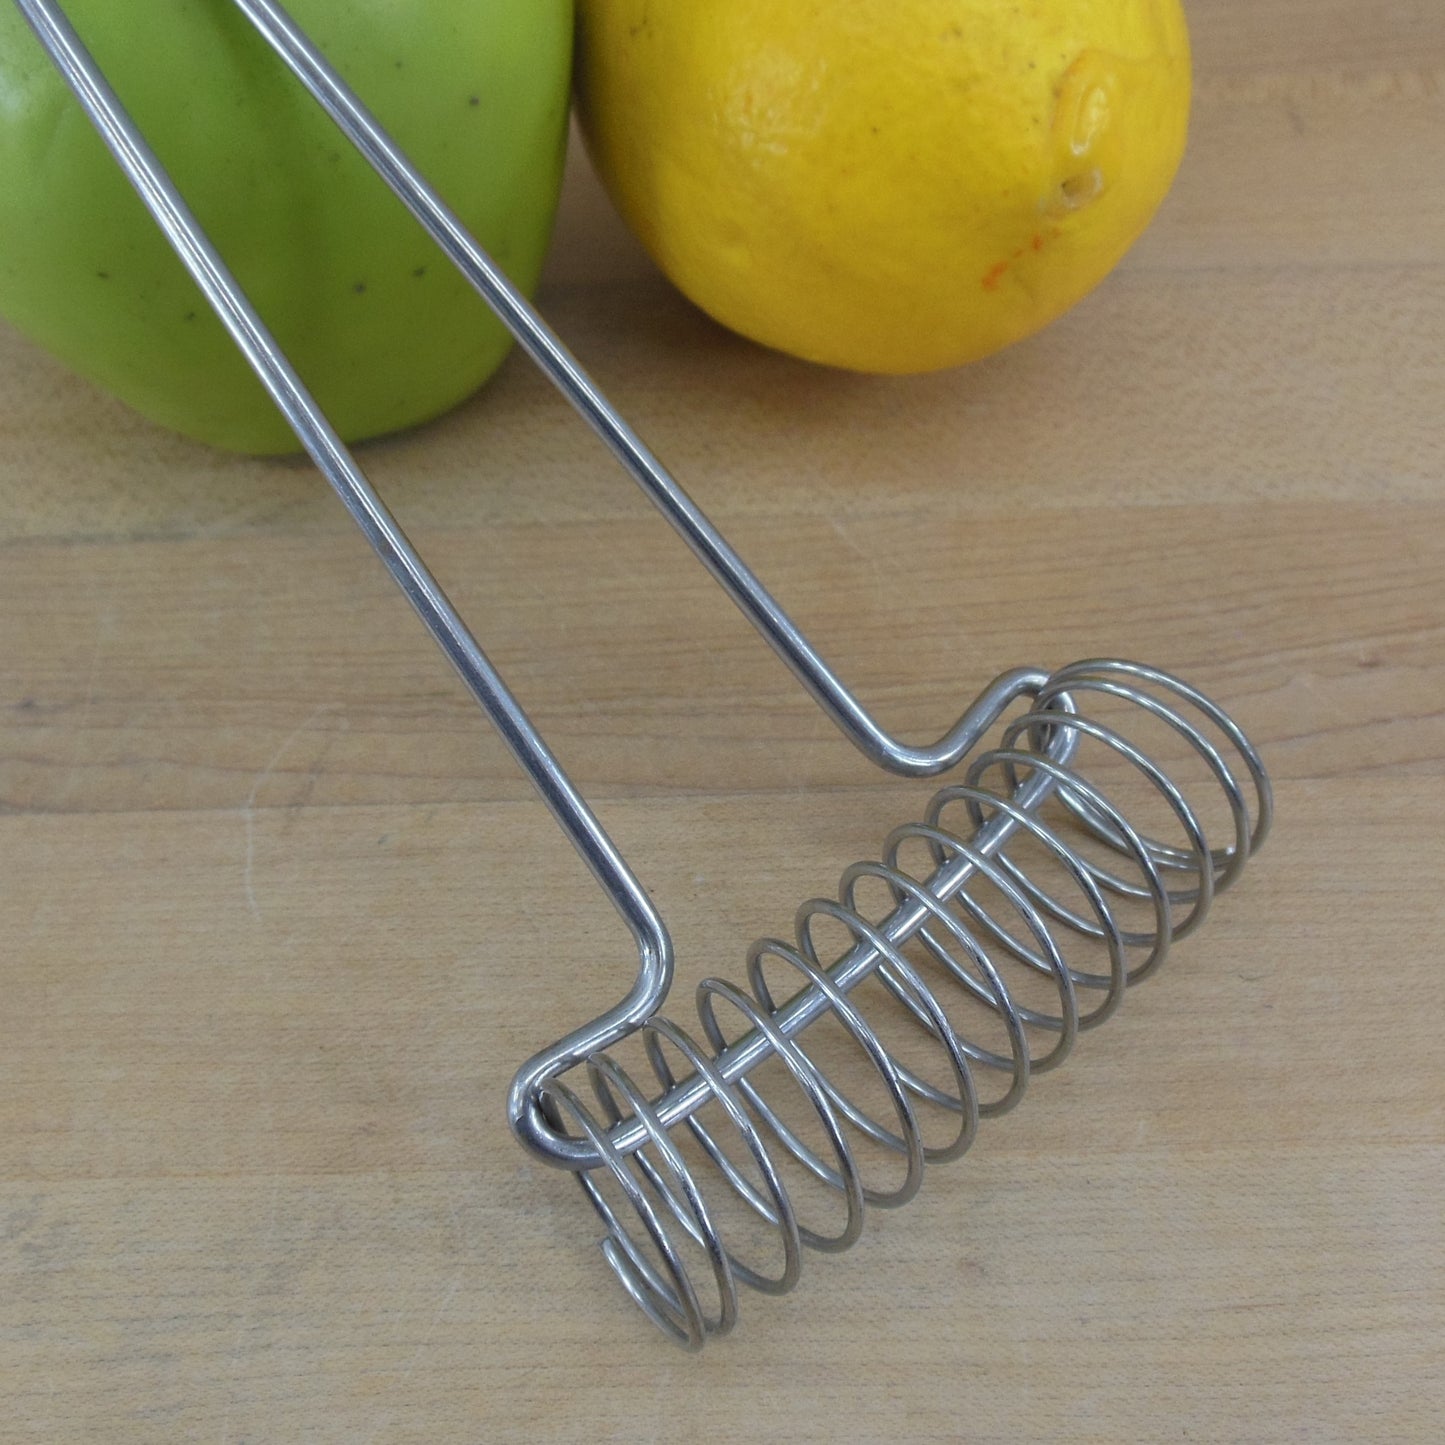 Cutco USA Stainless Coil Wire Whisk Mix-Stir - Classic Handle 1714 Used